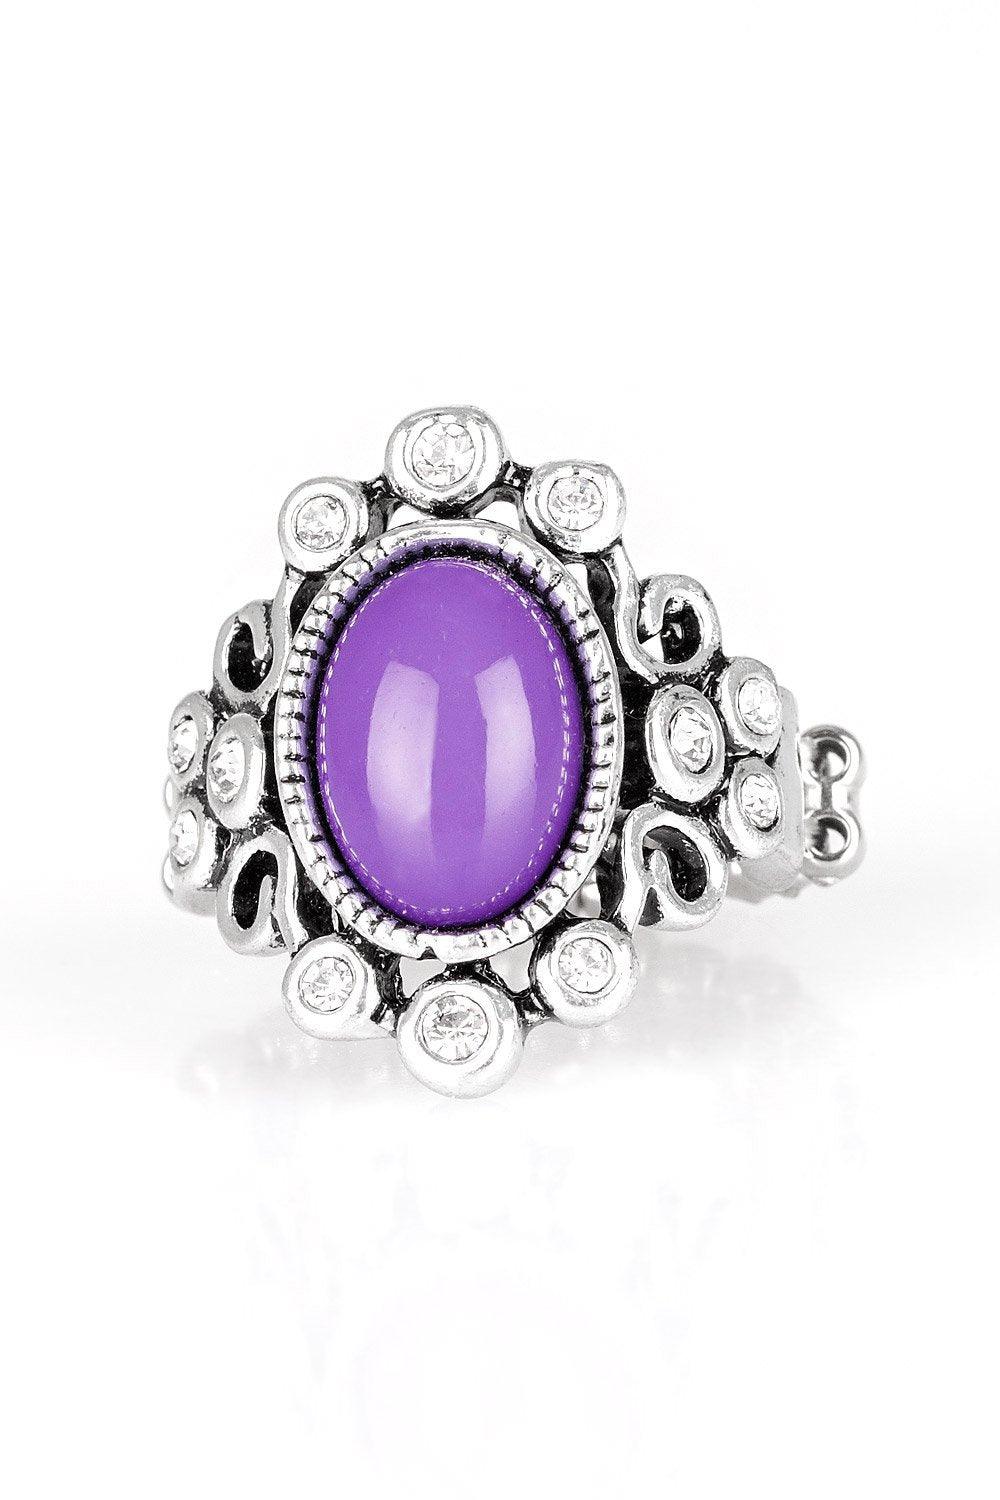 Paparazzi Accessories-Noticeably Notable - Purple Ring